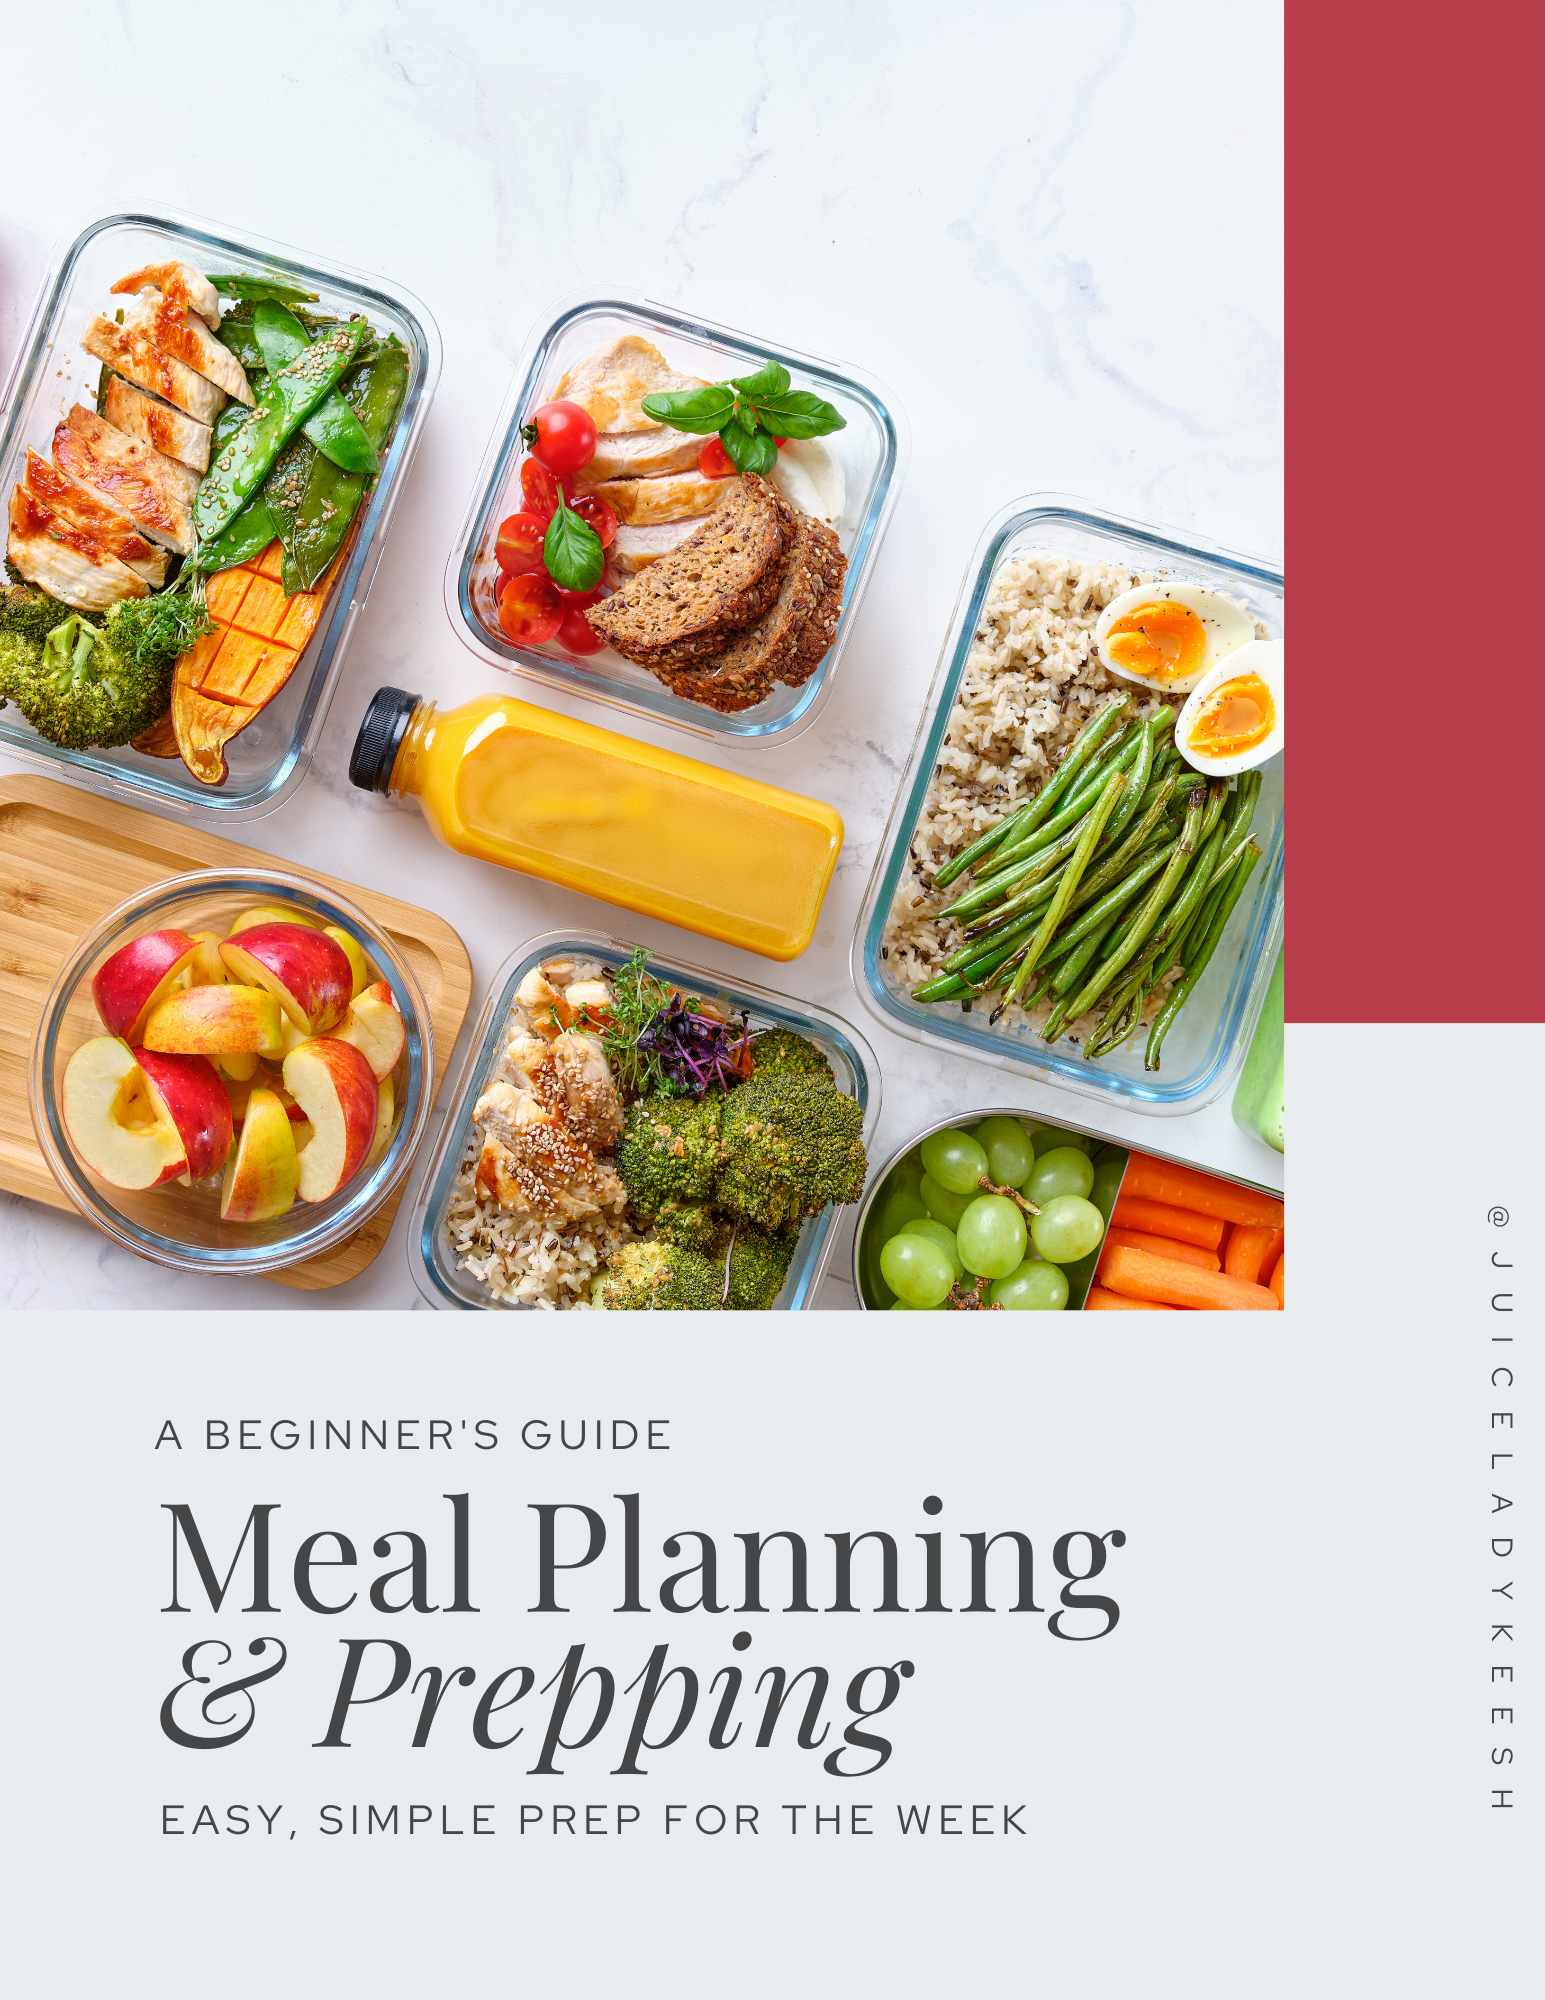 Meal Planning & Prepping Guide